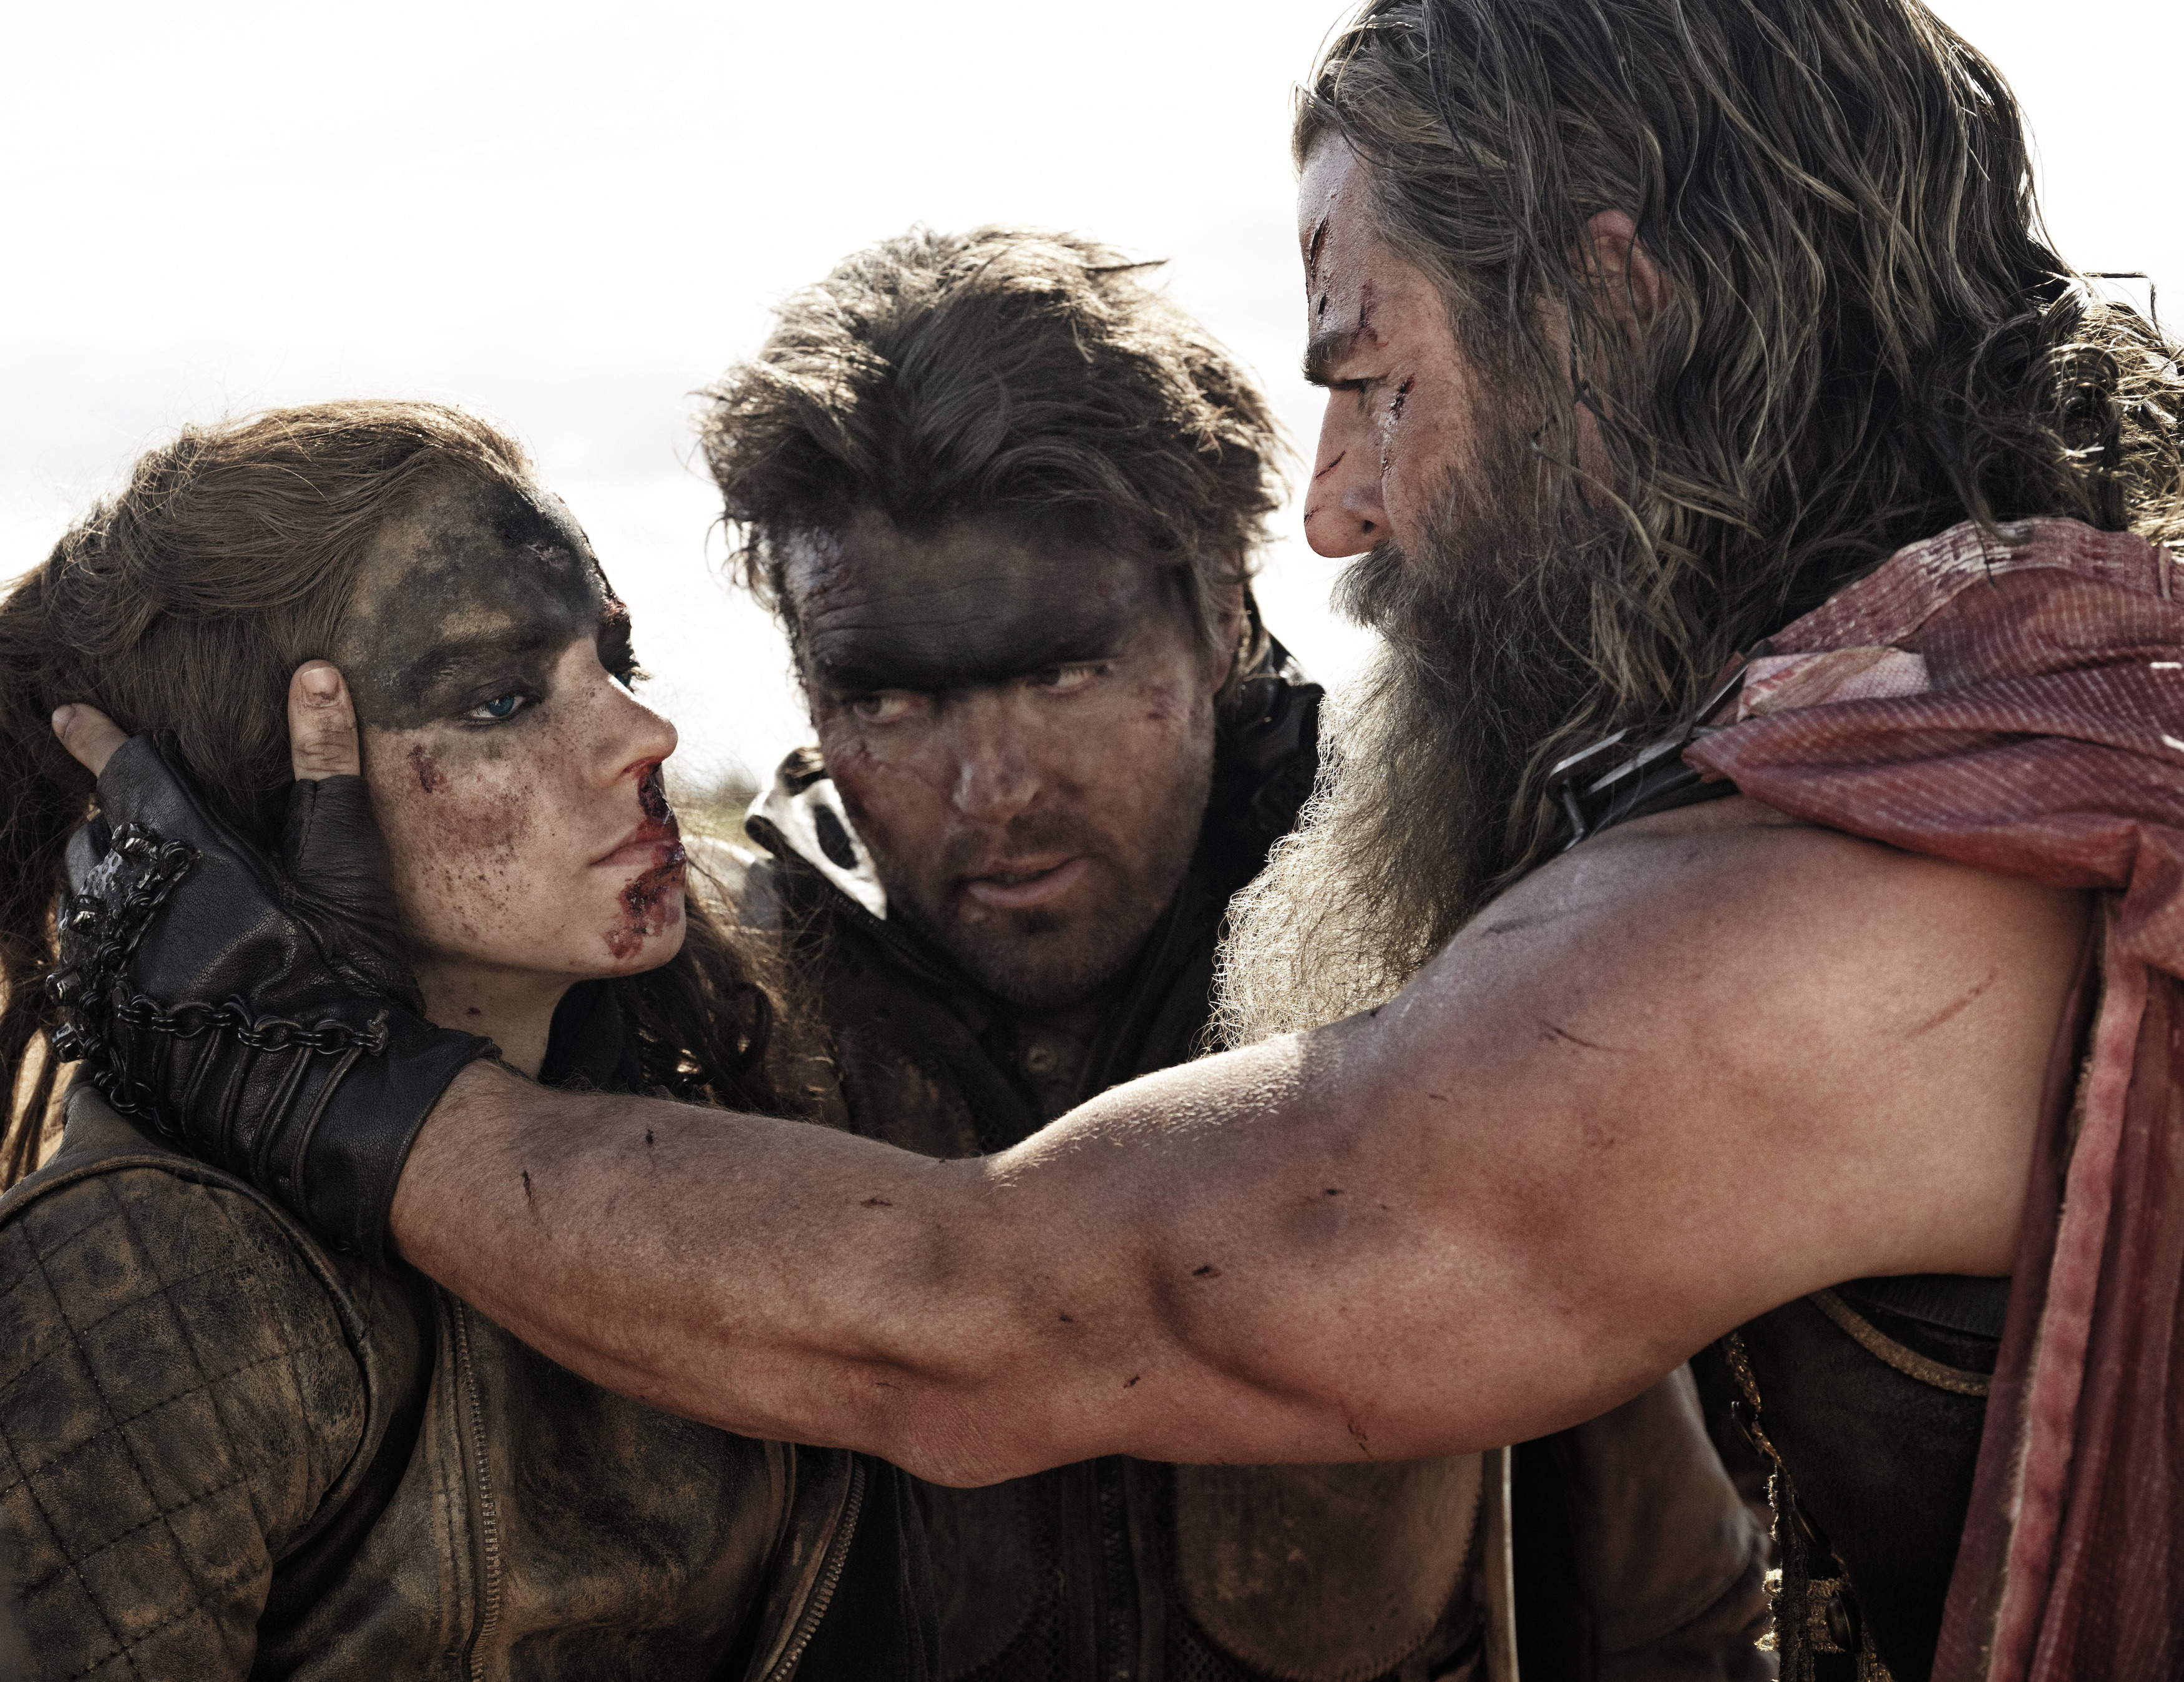 Furiosa (Anya Taylor-Joy), Praetorian Jack (Tom Burke), and Dementus (Chris Hemsworth), three extremely filthy Wasteland-dwellers with greasepaint-smeared faces, huddle close together, with Dementus holding Furiosa’s proud face in his hands, in George Miller’s Furiosa